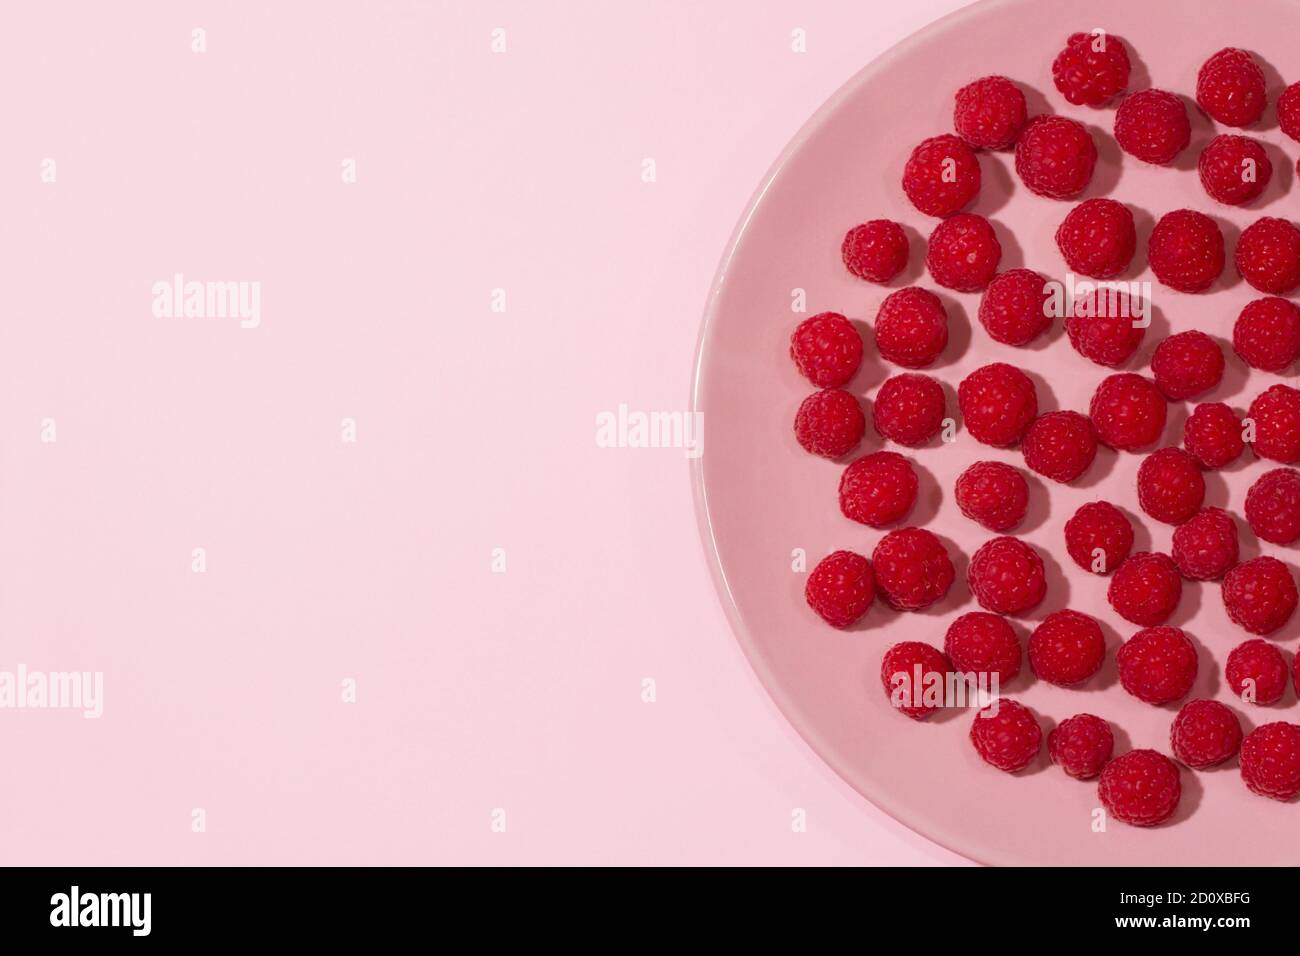 Bright ripe juicy raspberries on a pastel pink plate on a pastel light blue background. Stock Photo